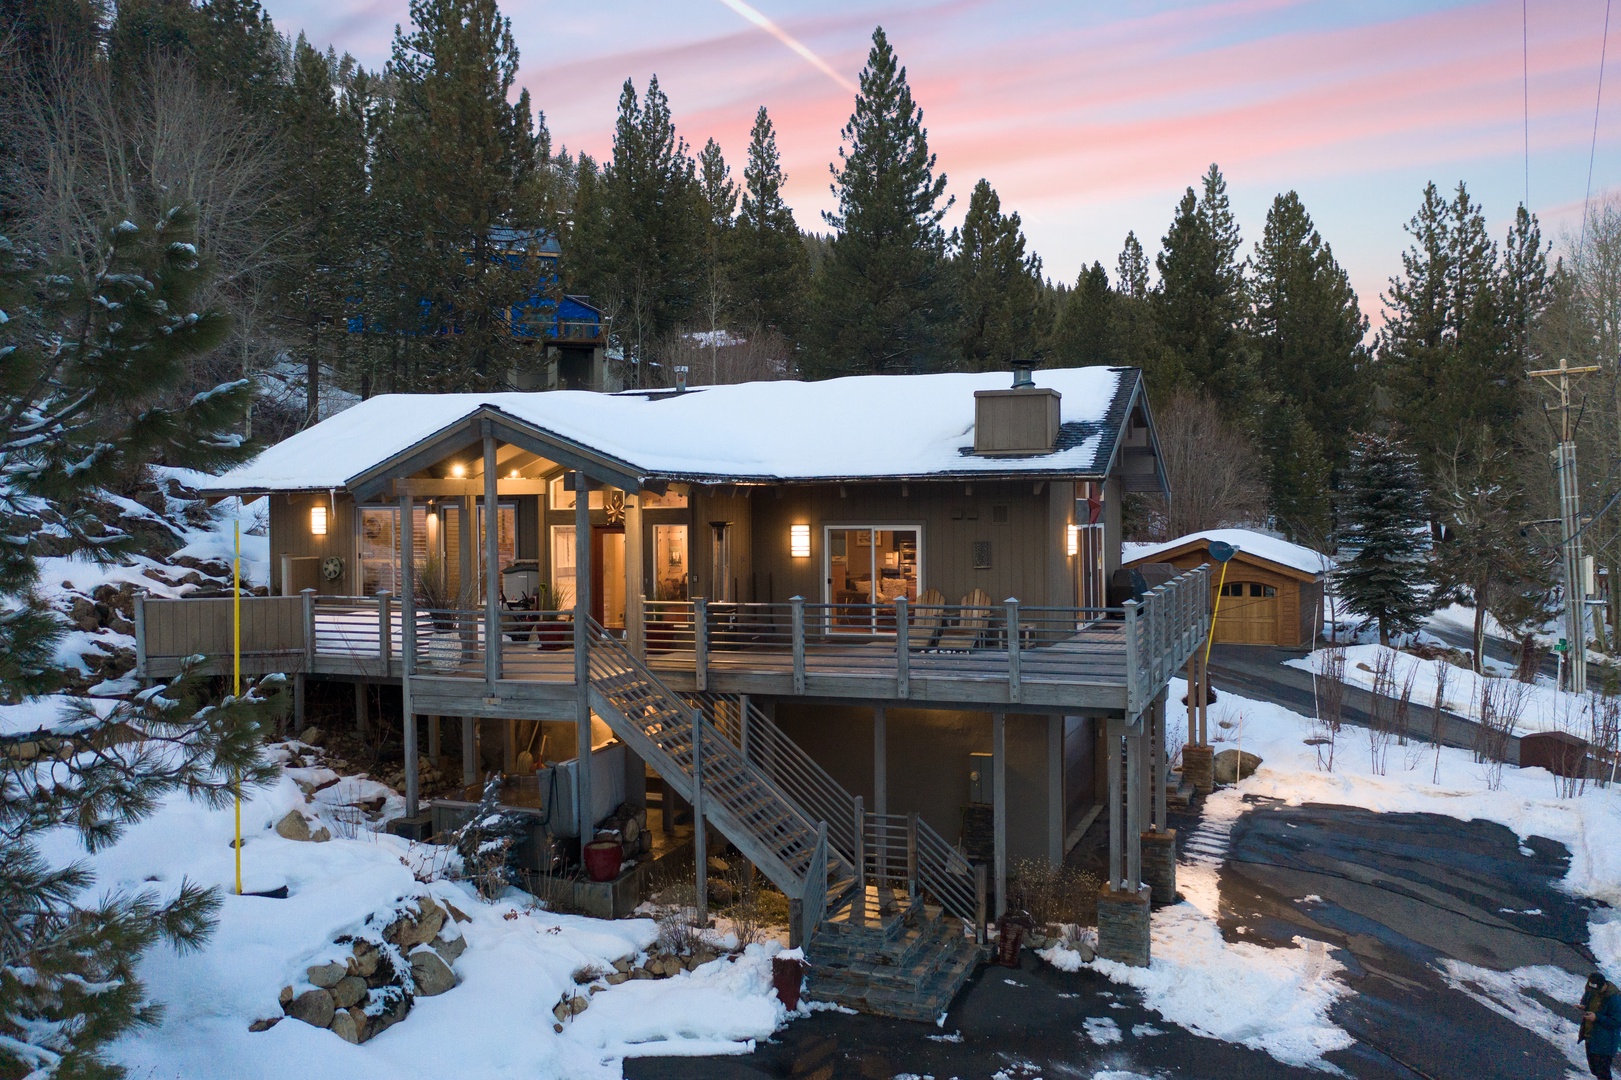 Outdoor view of our squaw valley rental: Eagle's Nest Lodge